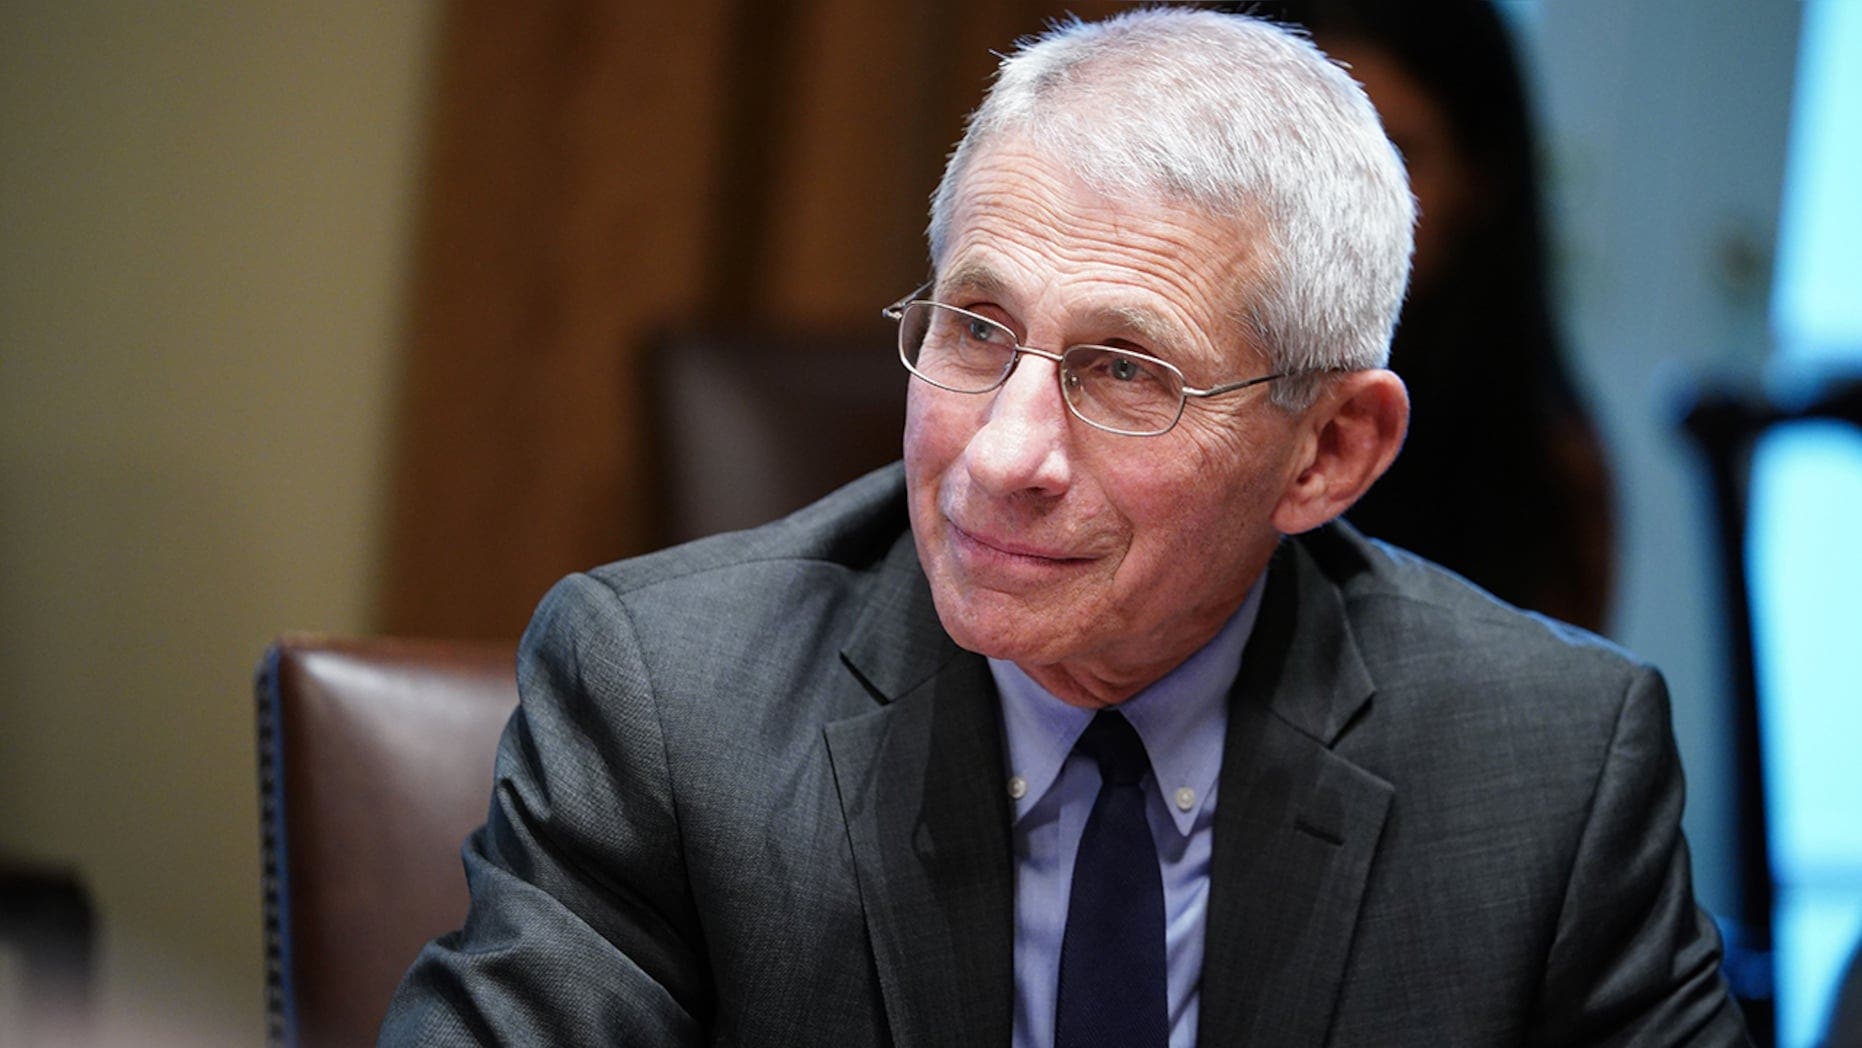 Fauci acknowledges outdoor COVID-19 transmission 'low,' expects updated mask guidance